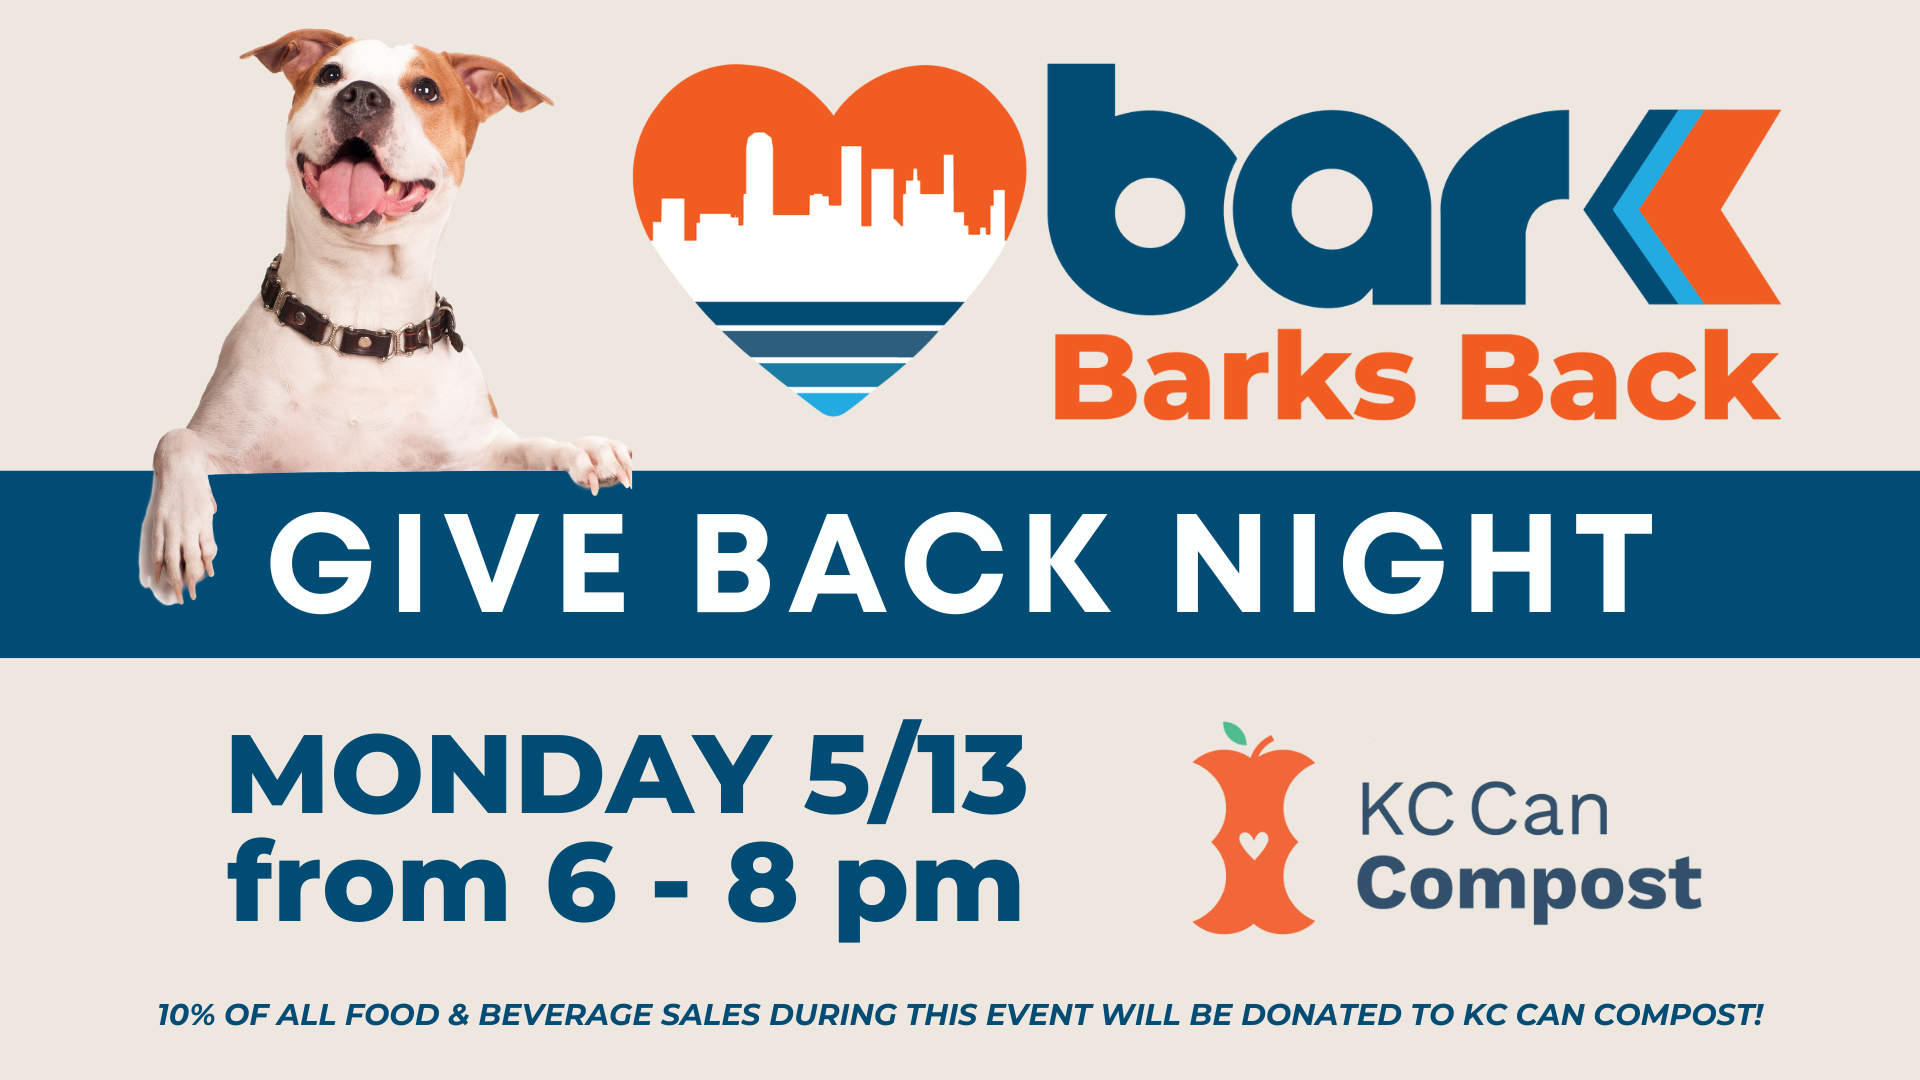 Bar K Barks back. Give back night. Monday 5/13 from 6 to 8 pm. KC Can Compost. 10% of all food and beverage sales during the event will be donated to KC Can Compost.